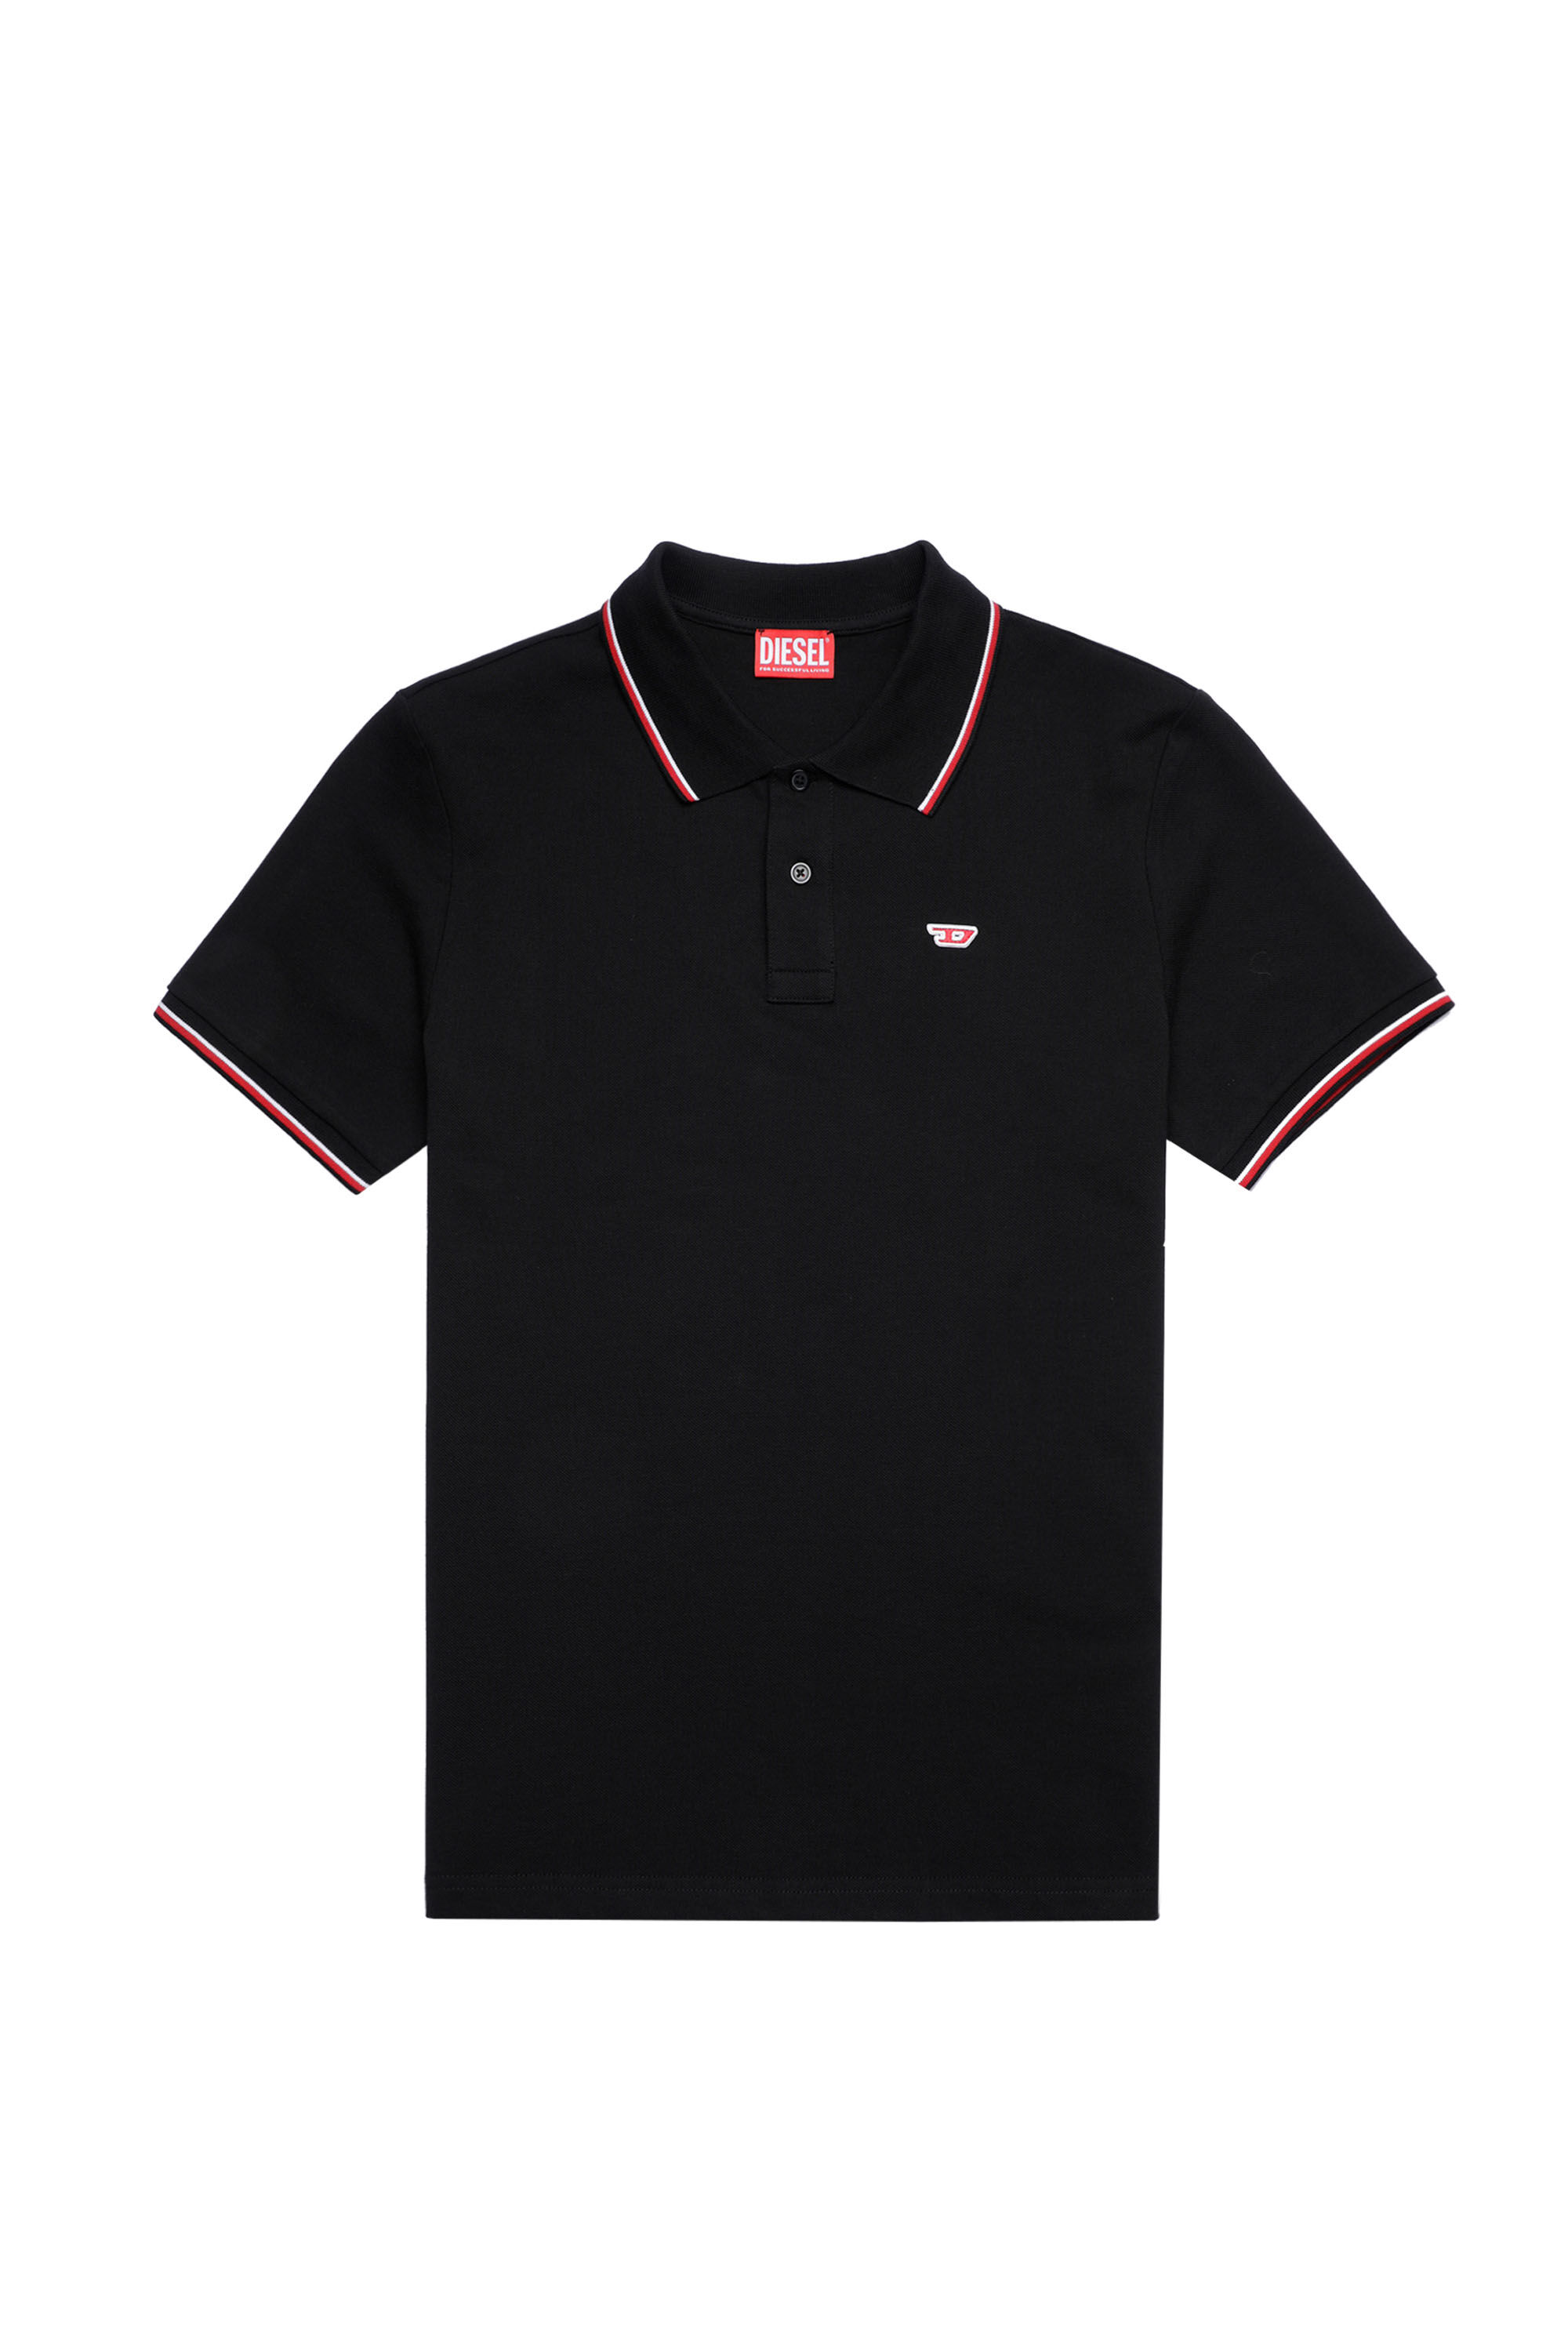 T-SMITH-D Man: Responsible polo shirt with D logo | Diesel